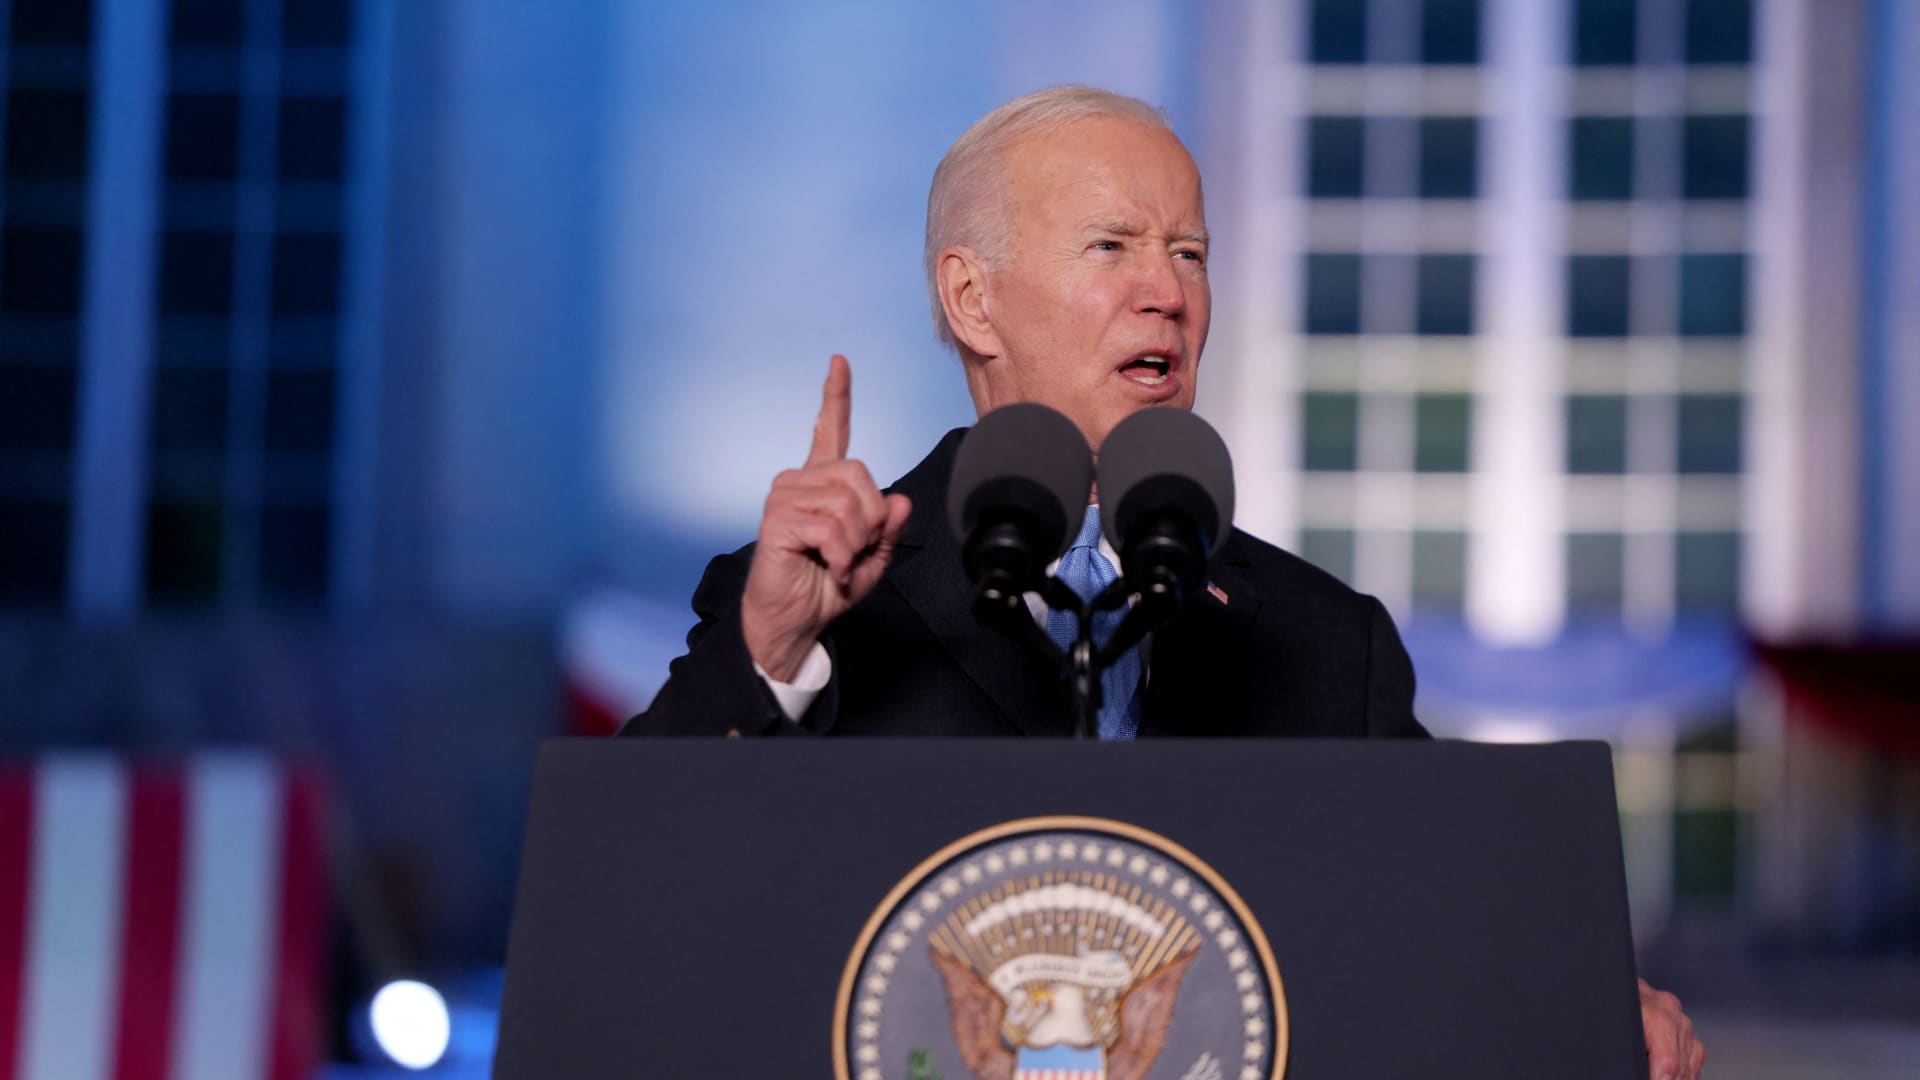 U.S. President Joe Biden speaks during an event at the Royal Castle, amid Russia's invasion of Ukraine, in Warsaw, Poland March 26, 2022.